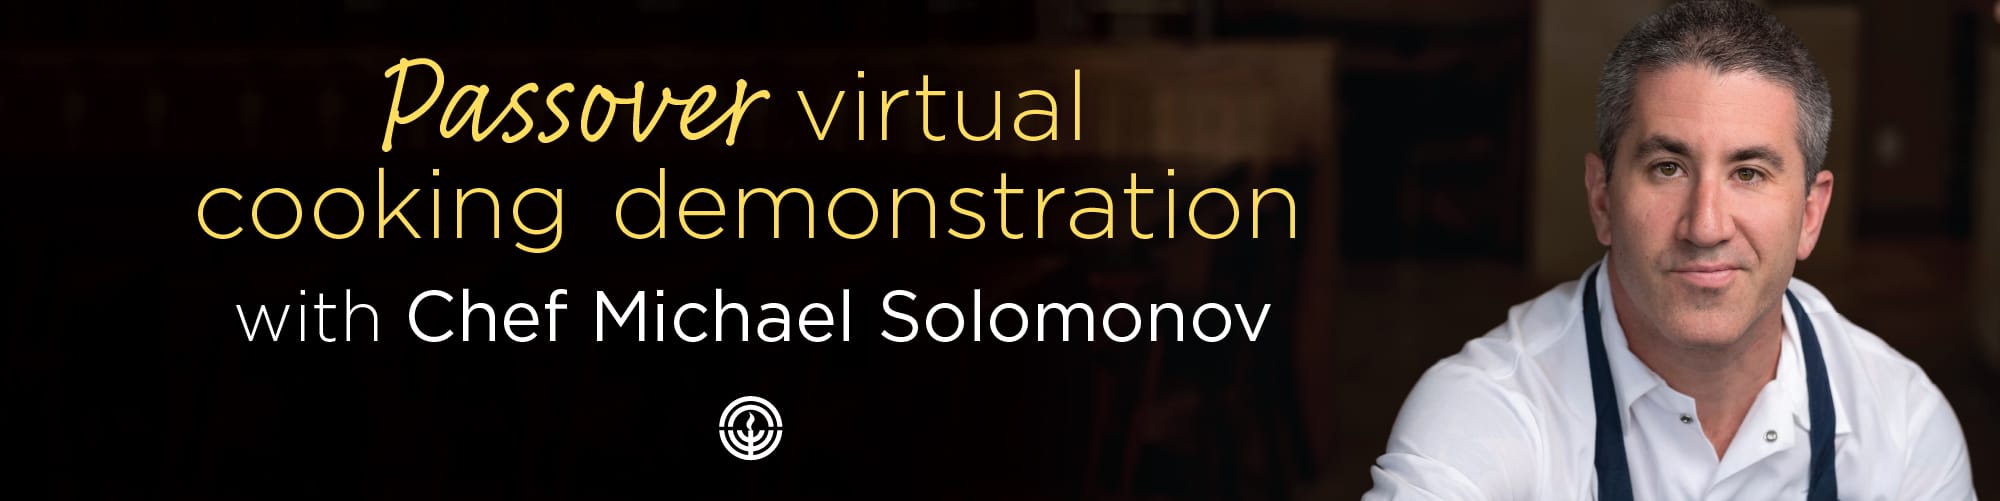 Banner with Photo of Chef Michal Solomonov. Reads: Passover Virtual Cooking Demonstration